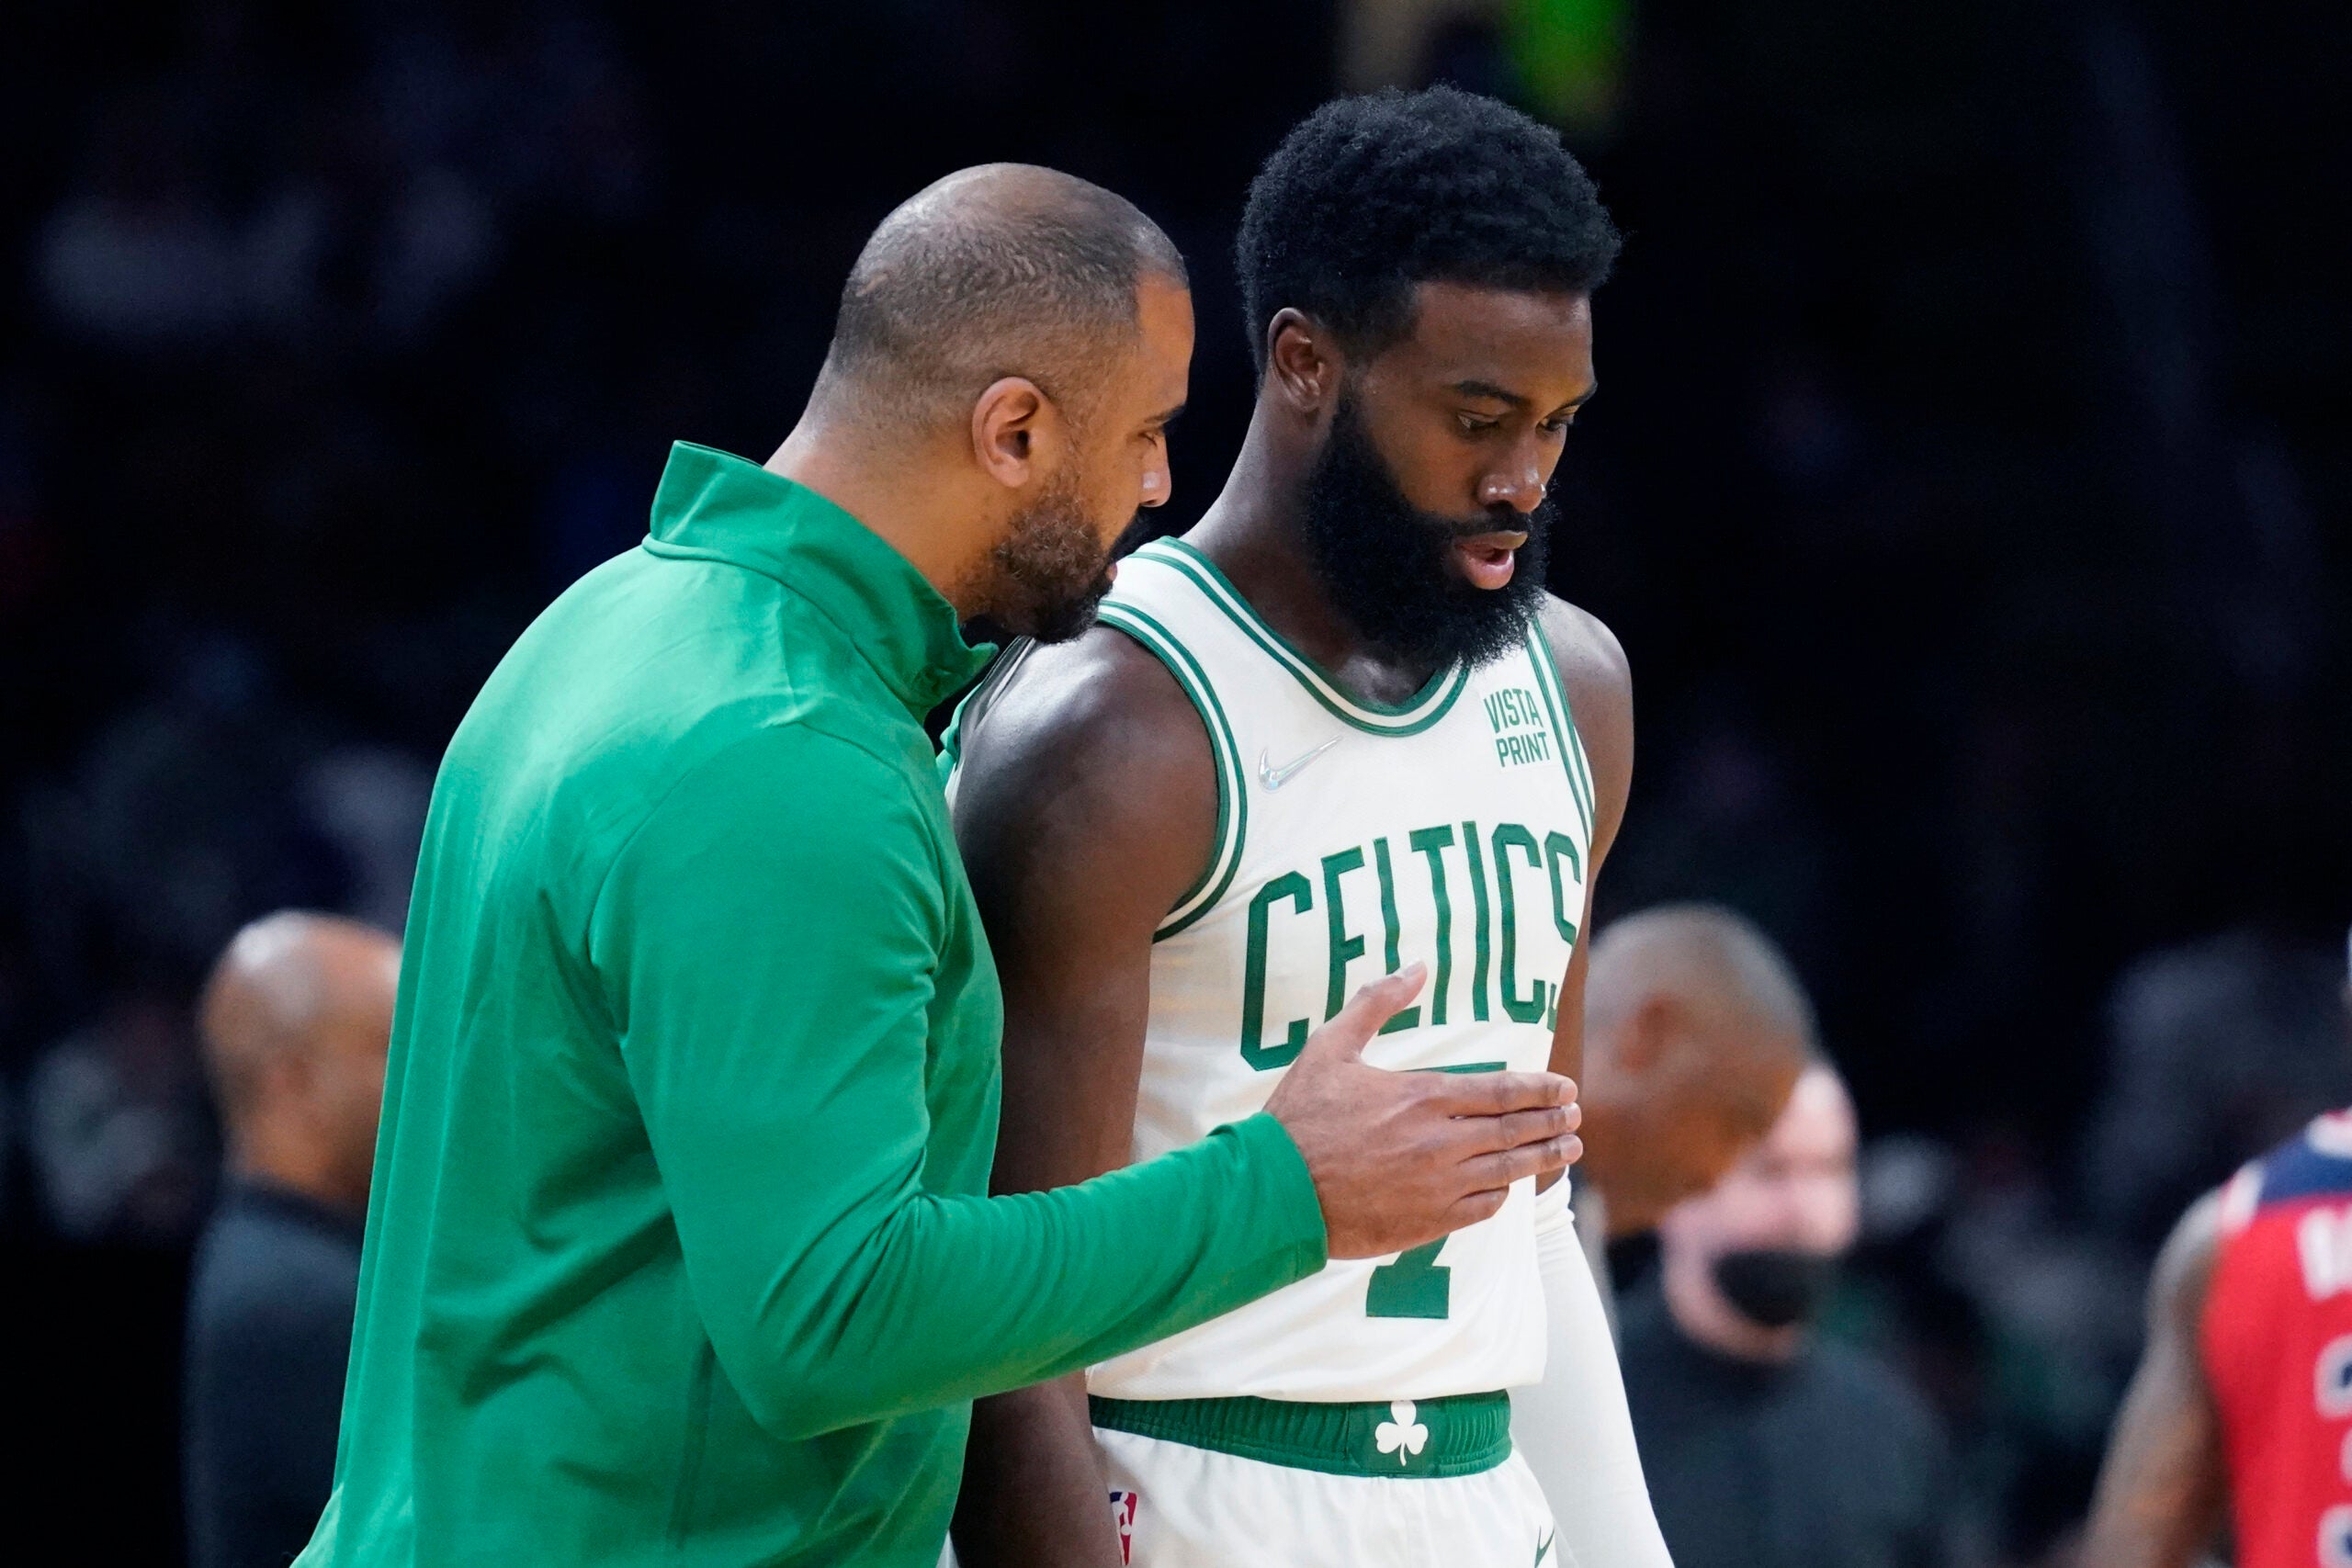 Lessons from Celtics-Wizards: The dos and don'ts of blowouts - CelticsBlog